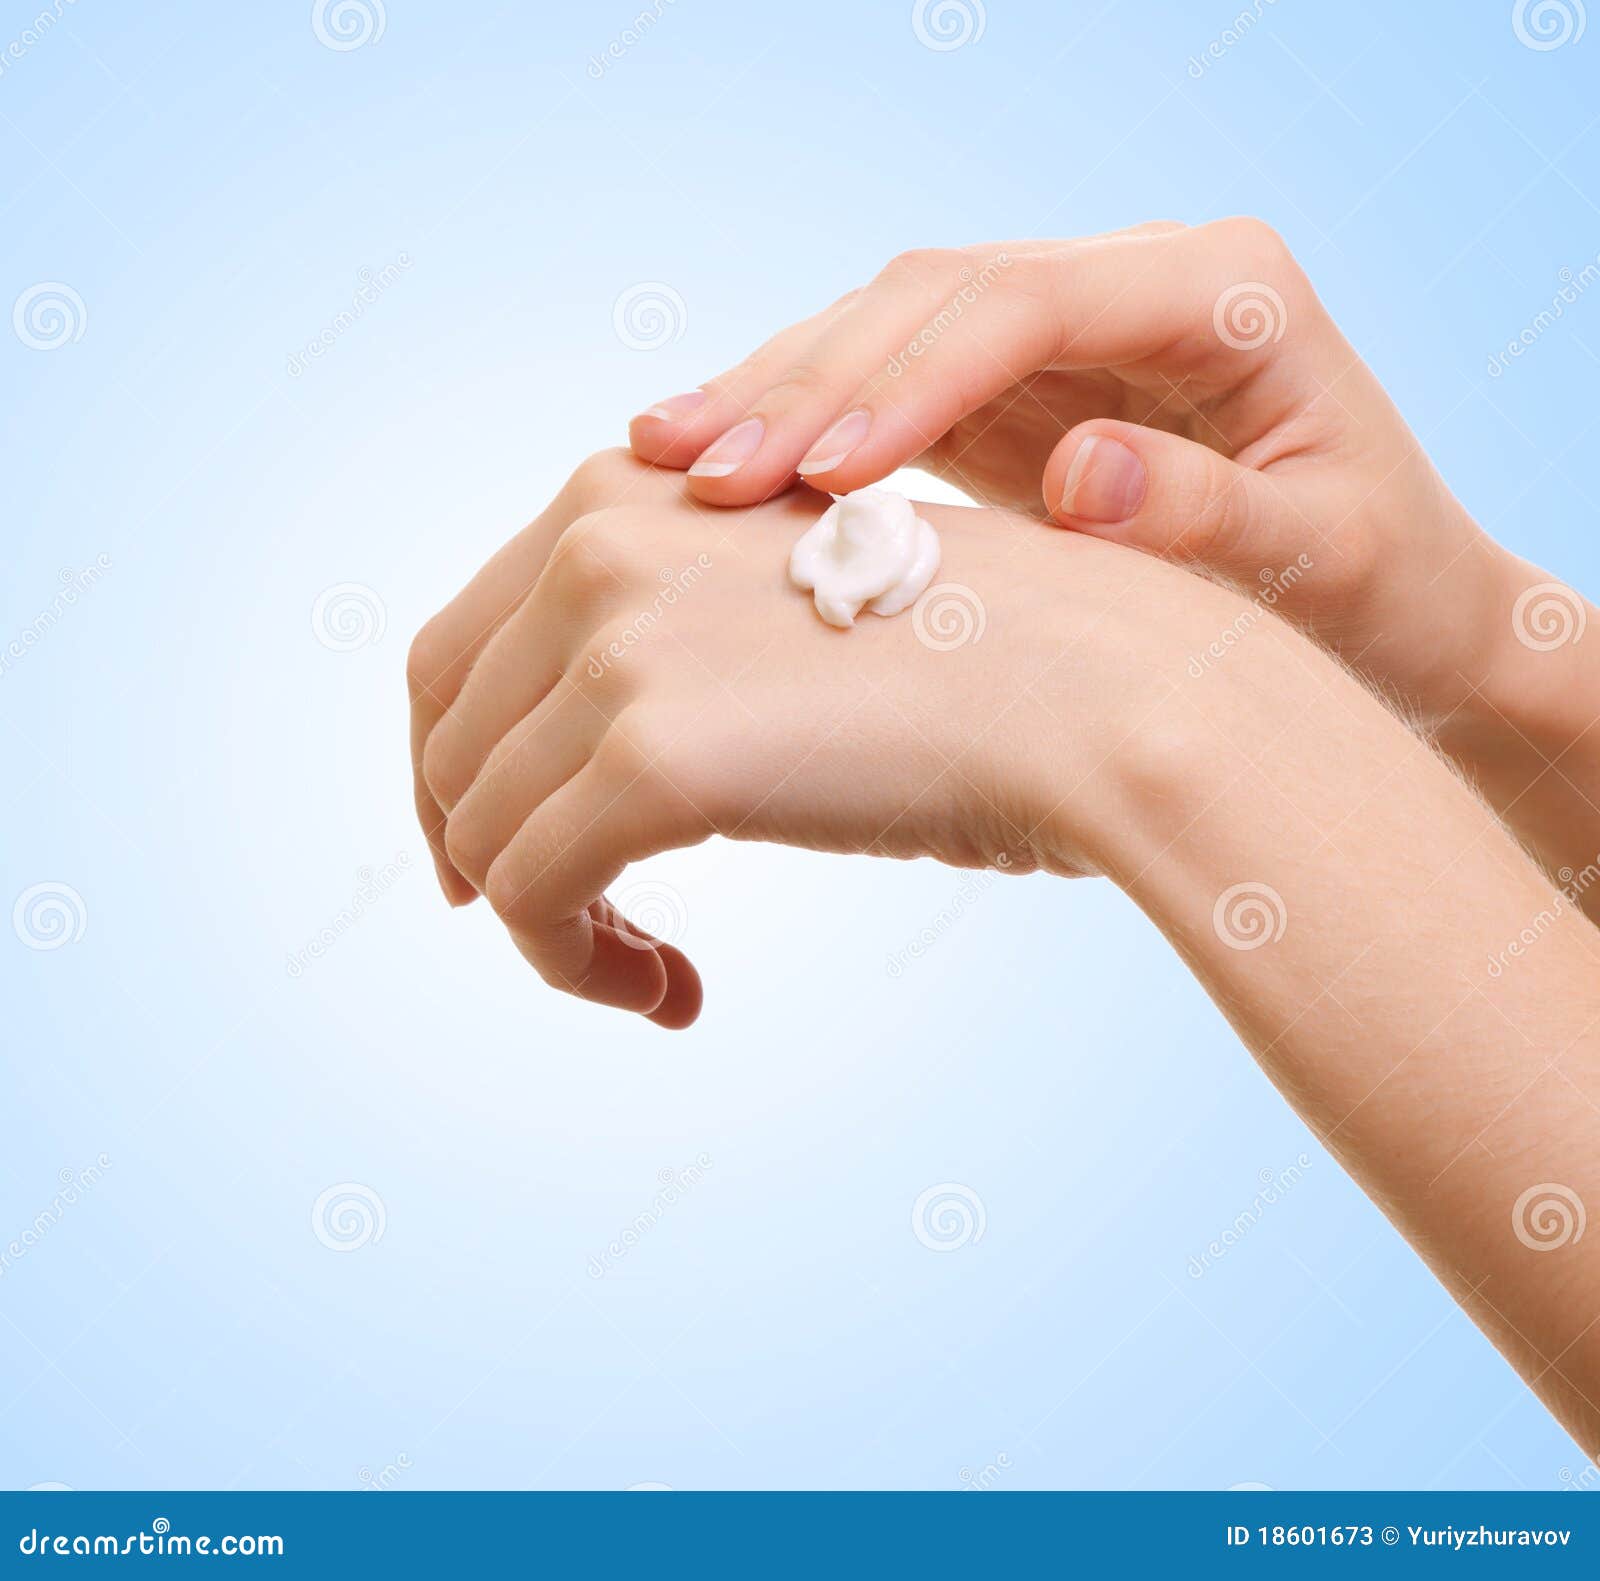 girl applying some white lotion on her hand